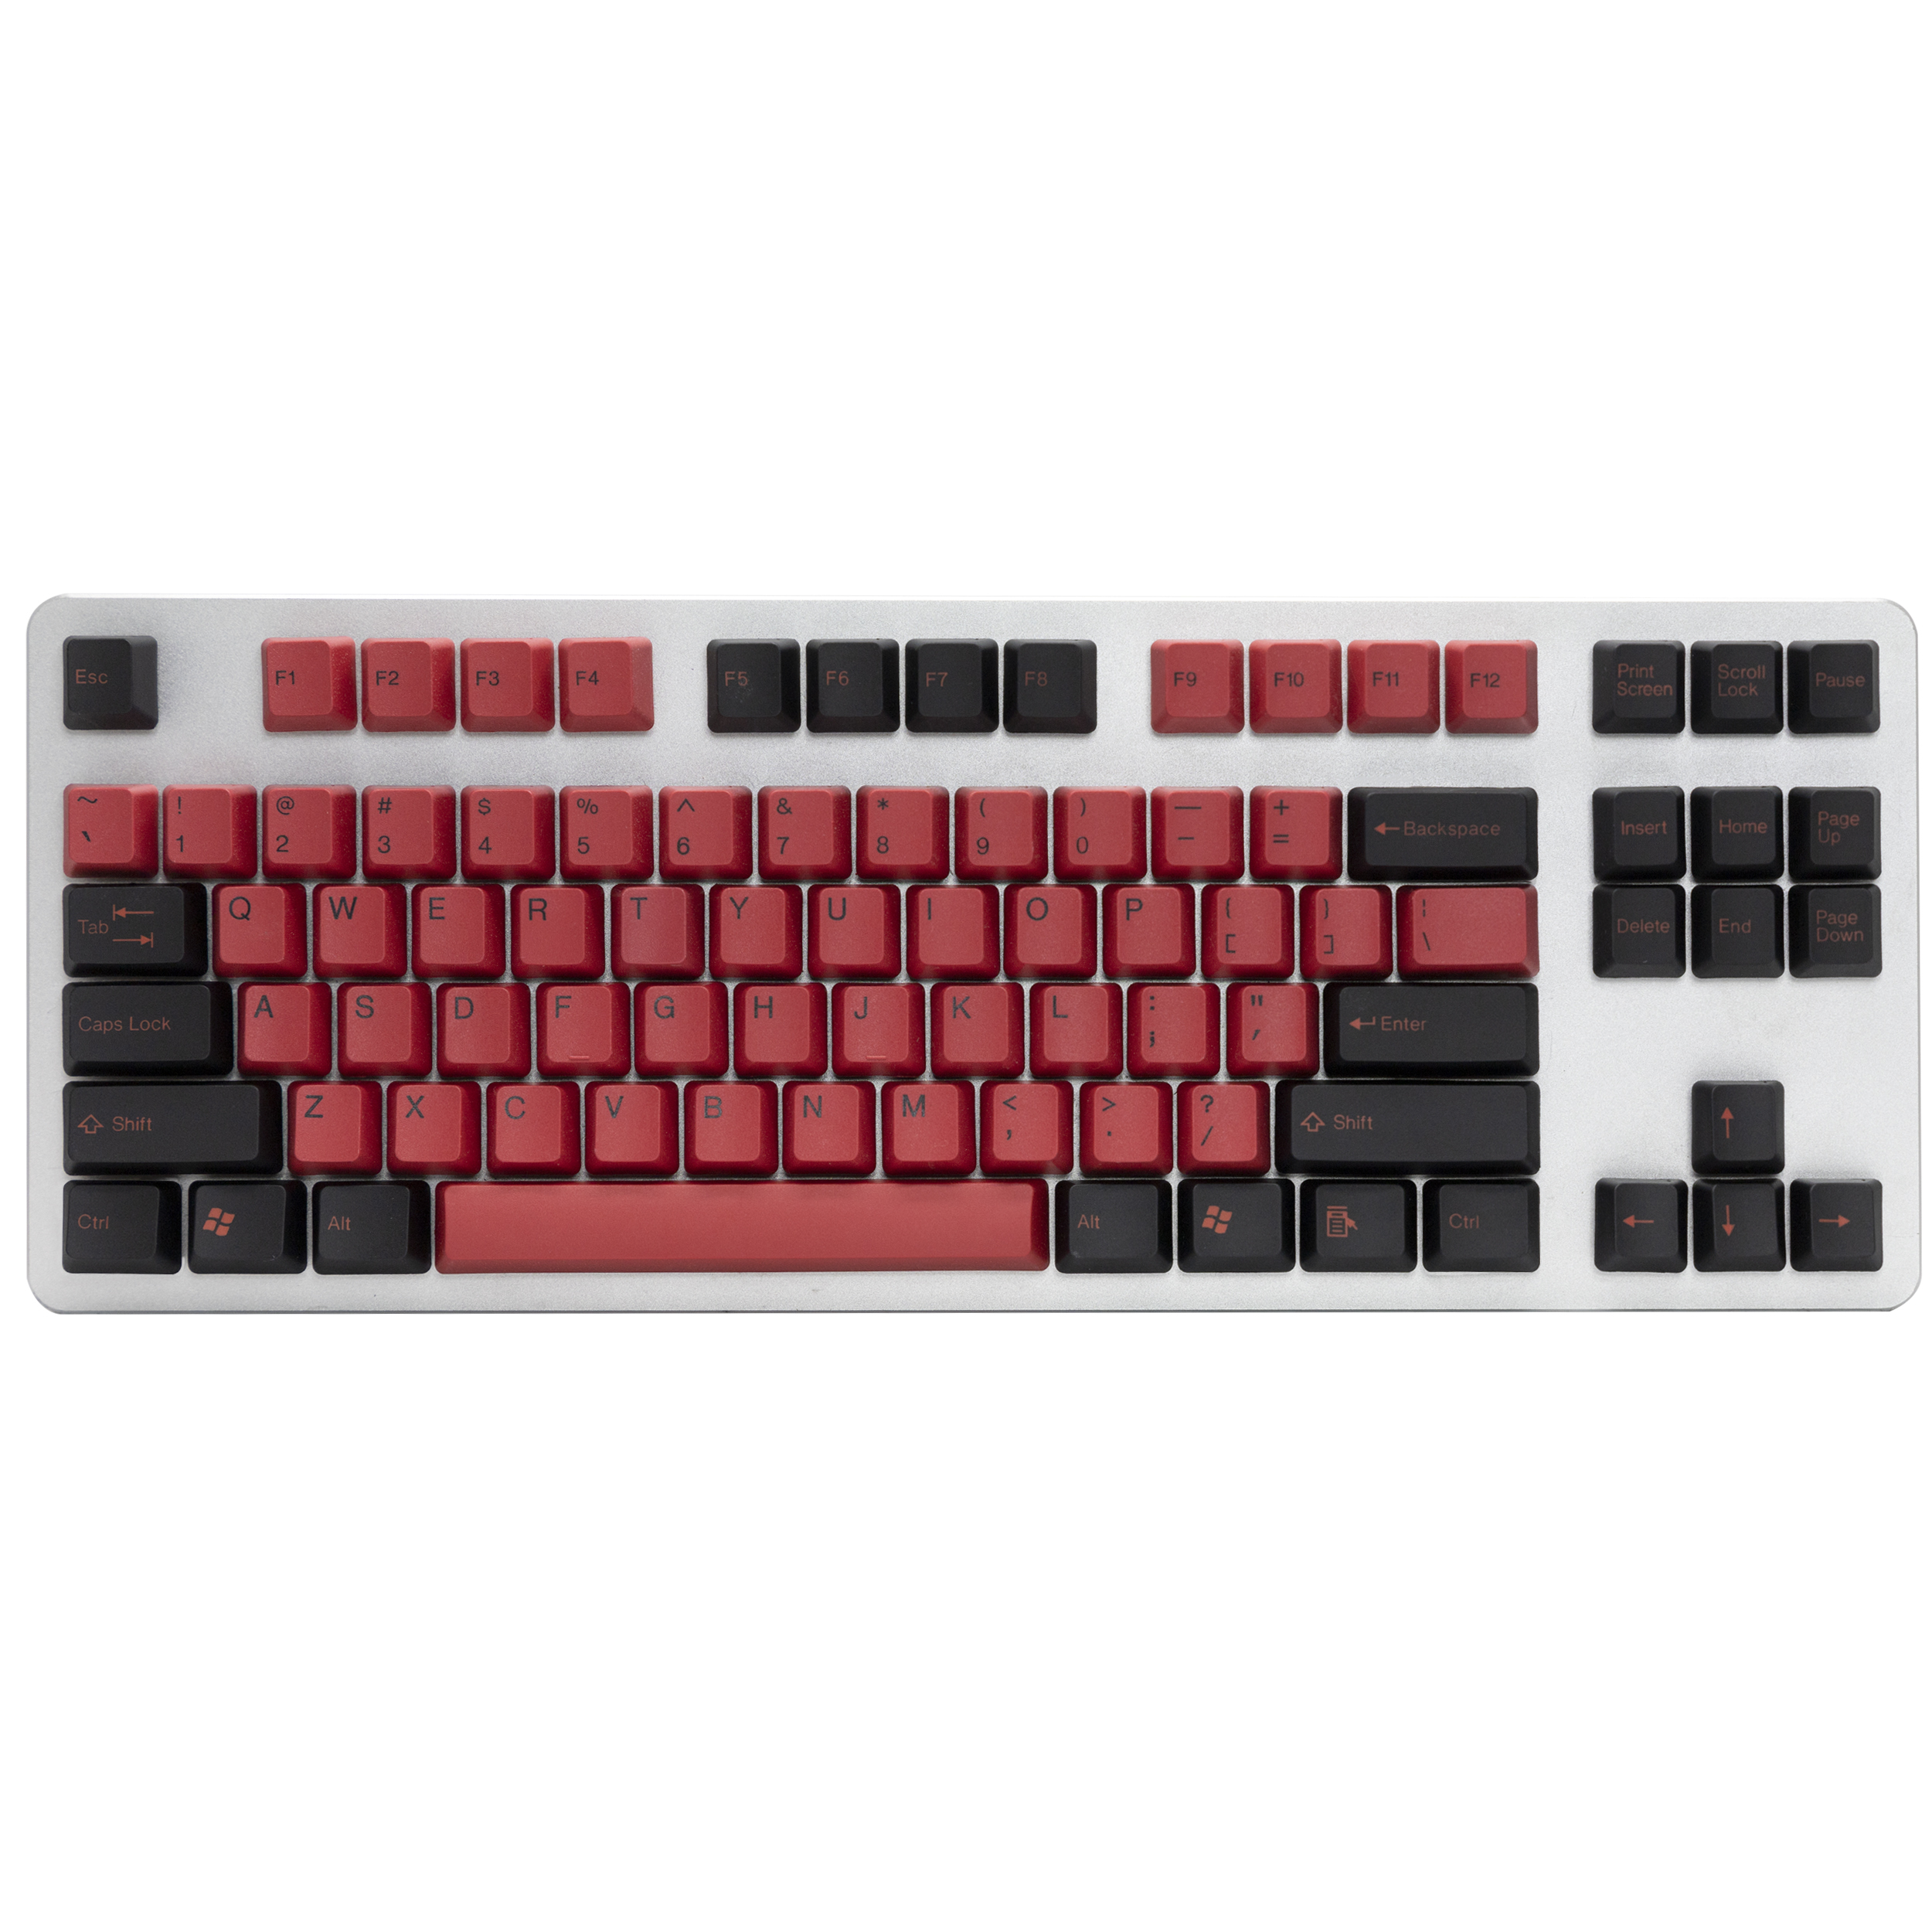 punktum fordrejer bassin Tai-hao DoubleShot Keycaps,Gaming Keycaps,PBT